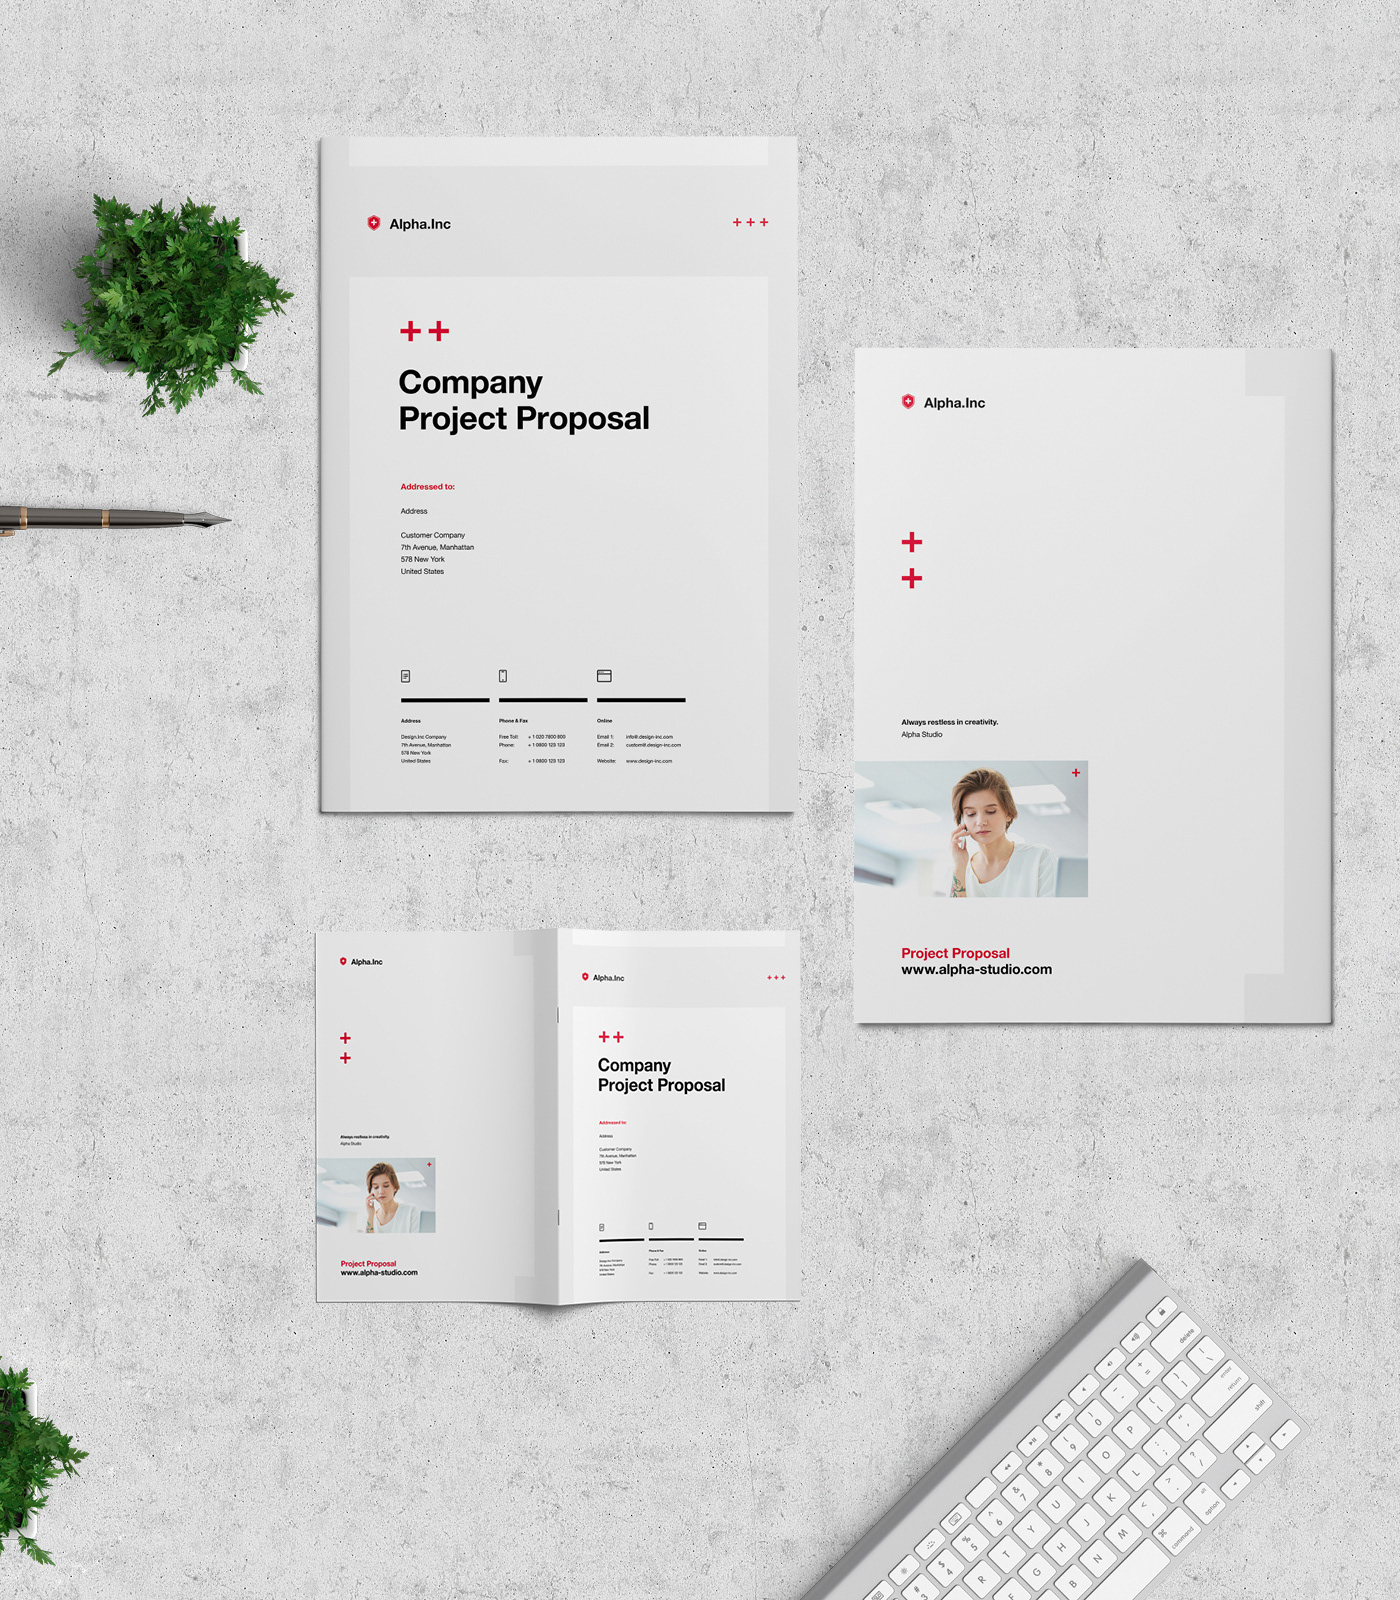 Proposal template design Estimation Office mac word Project company Web